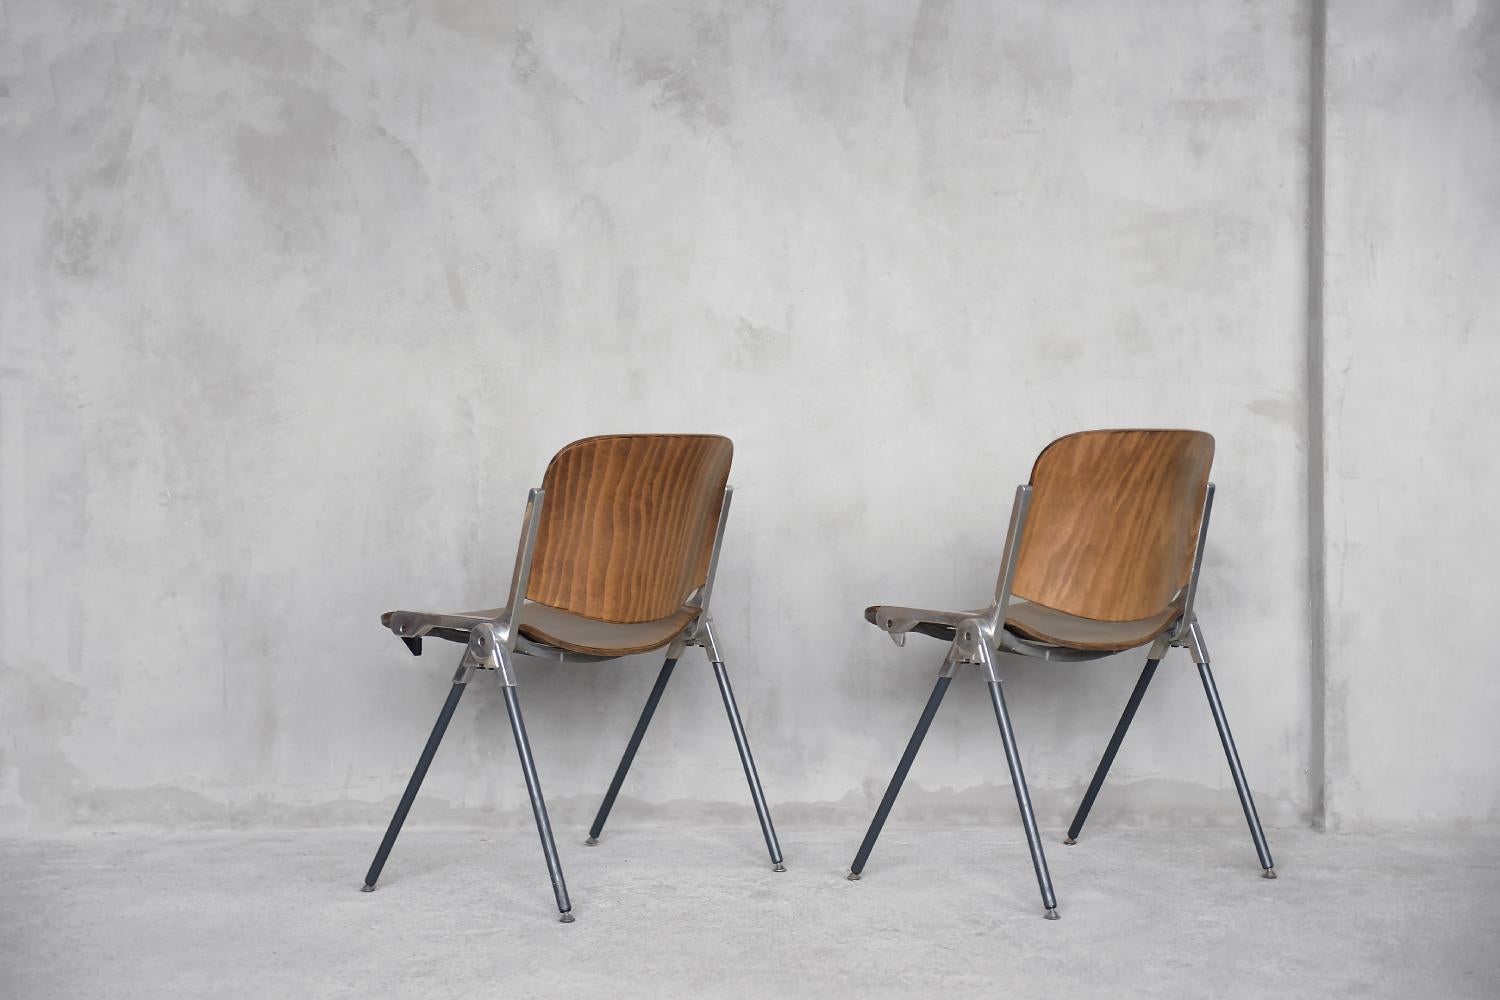 This set of Agorà chairs was designed by Paolo Favaretto for the Italian manufacturer Emmegi during the 1970s. The frame is made of anodized aluminum. The seat and backrest are made of bent beech plywood. Furniture made of this material combines the